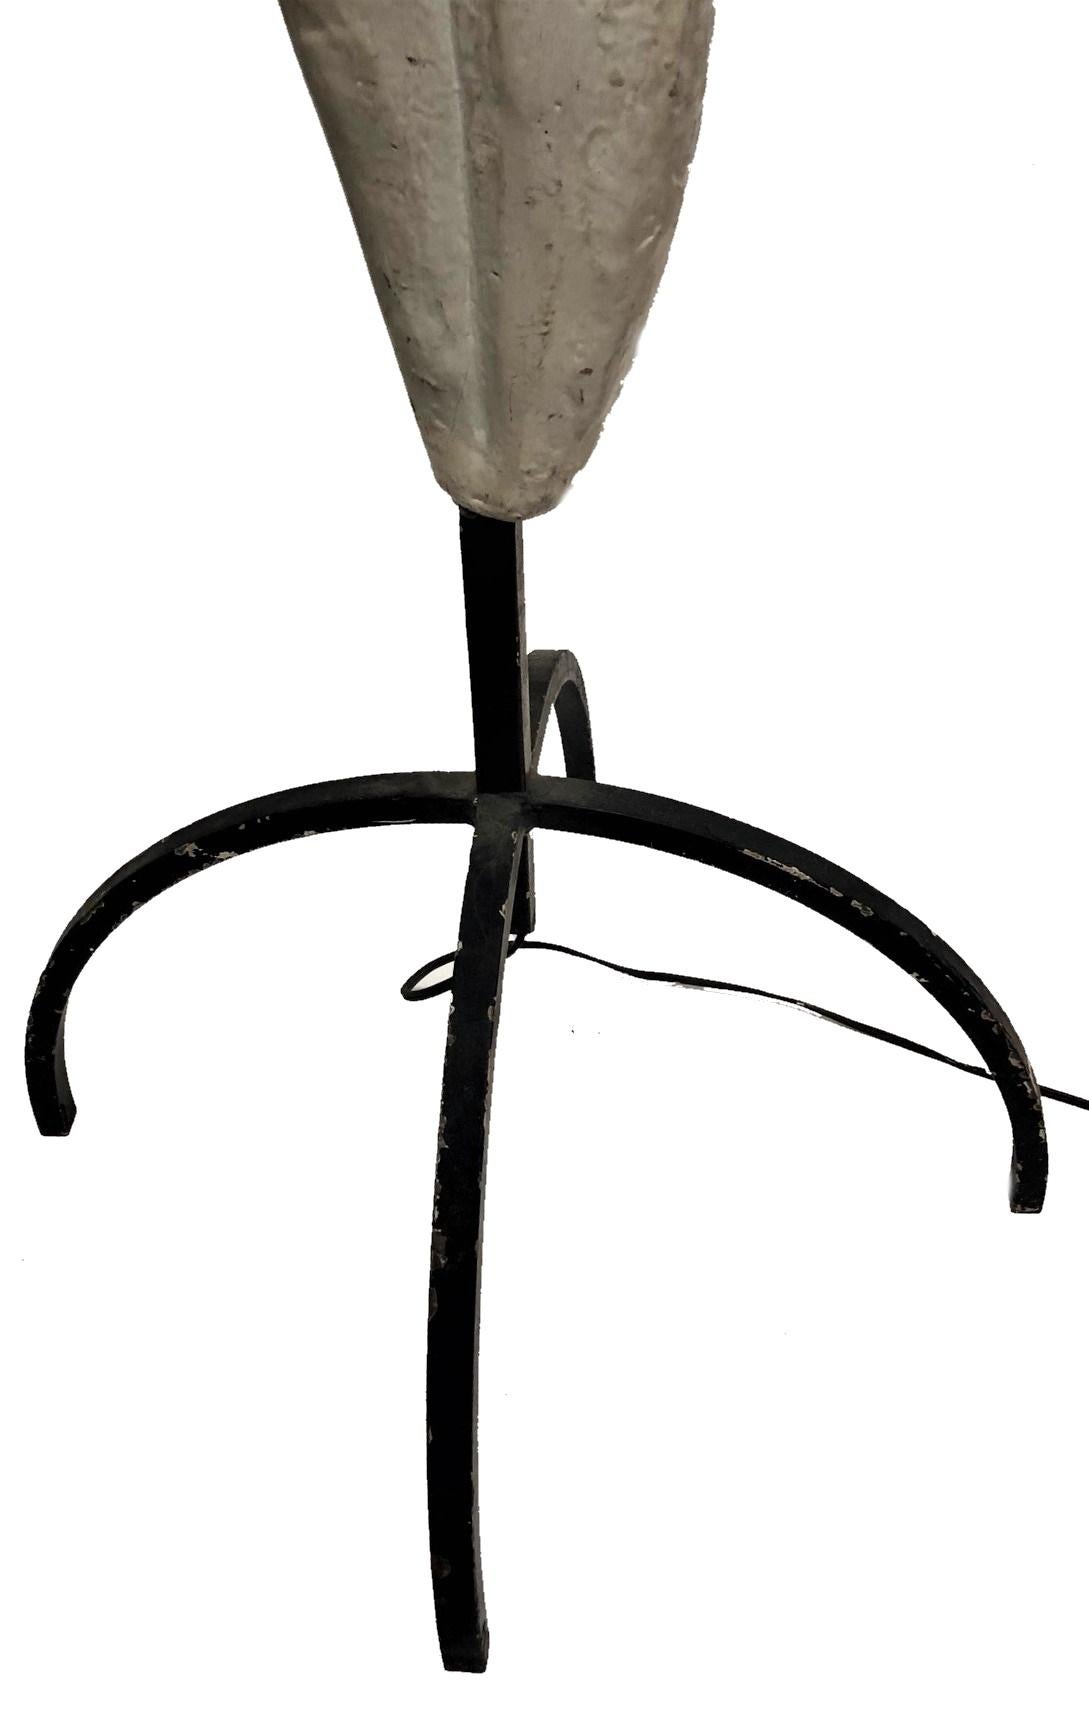 Modernist Floor Lamp in Alberto Giacometti Manner, Late XX Century For Sale 5